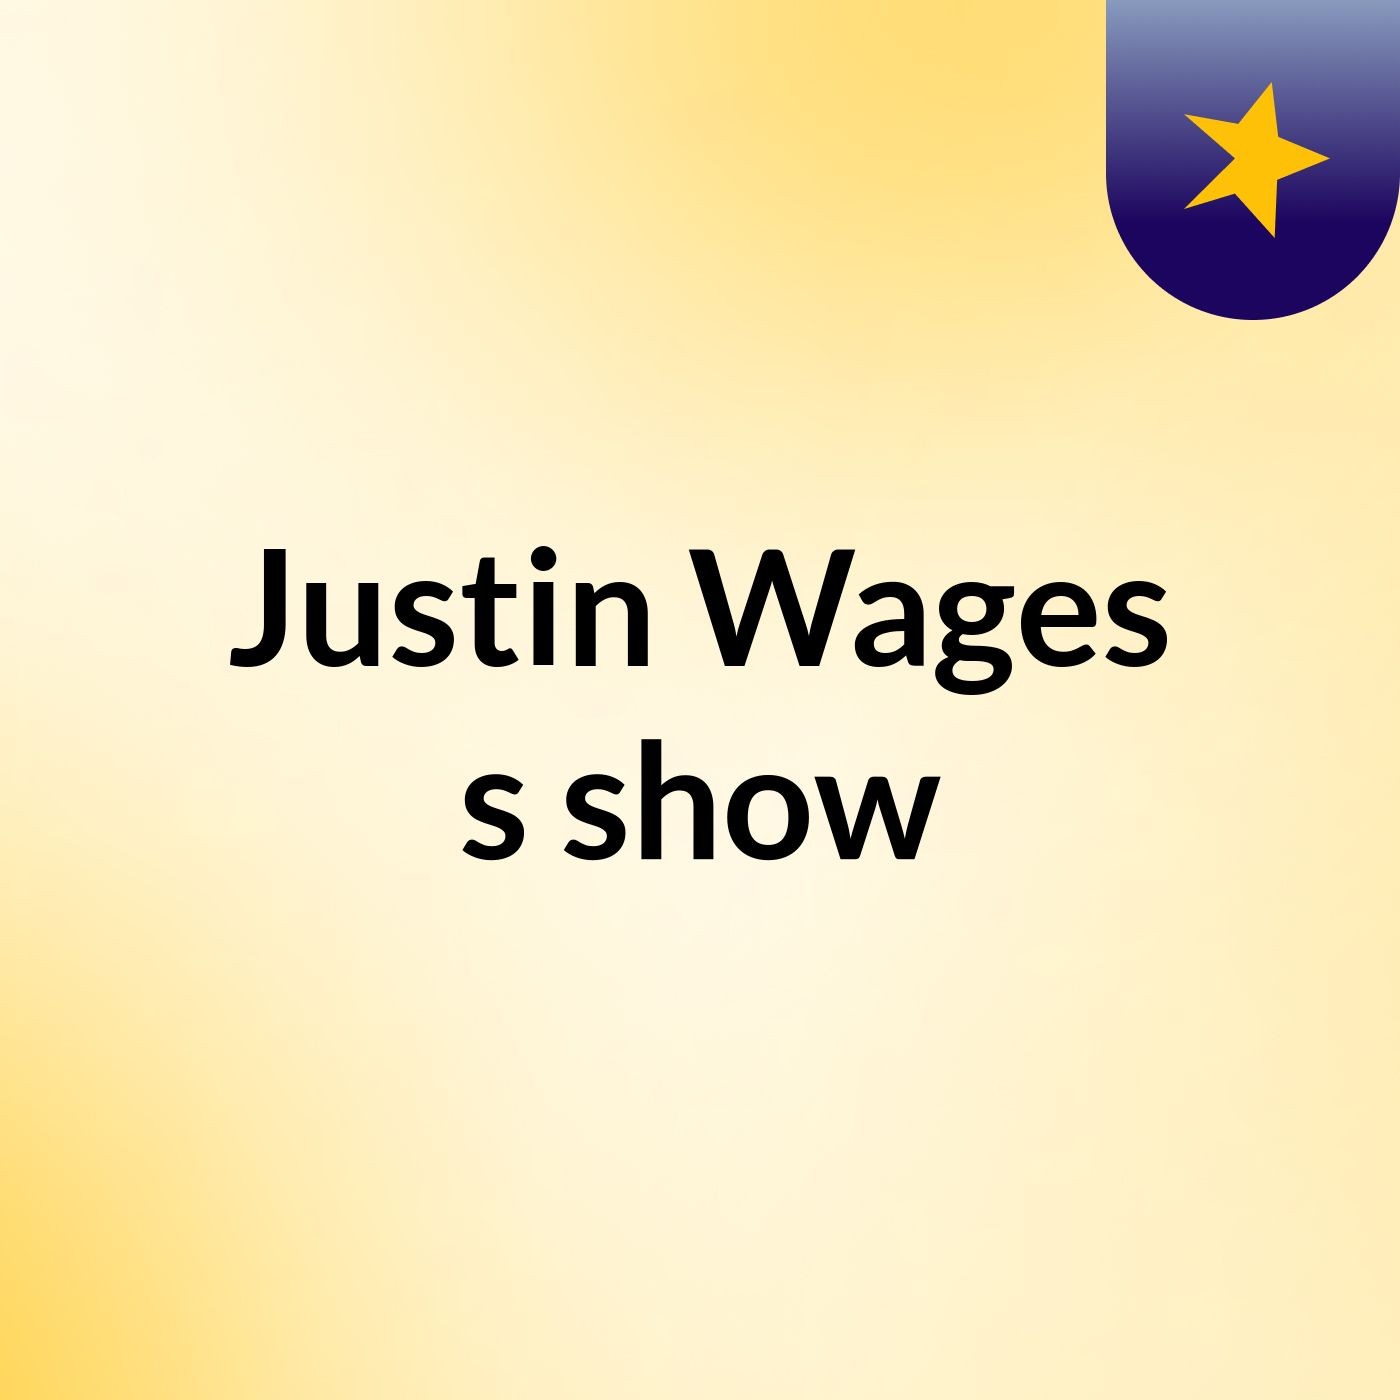 Justin Wages's show